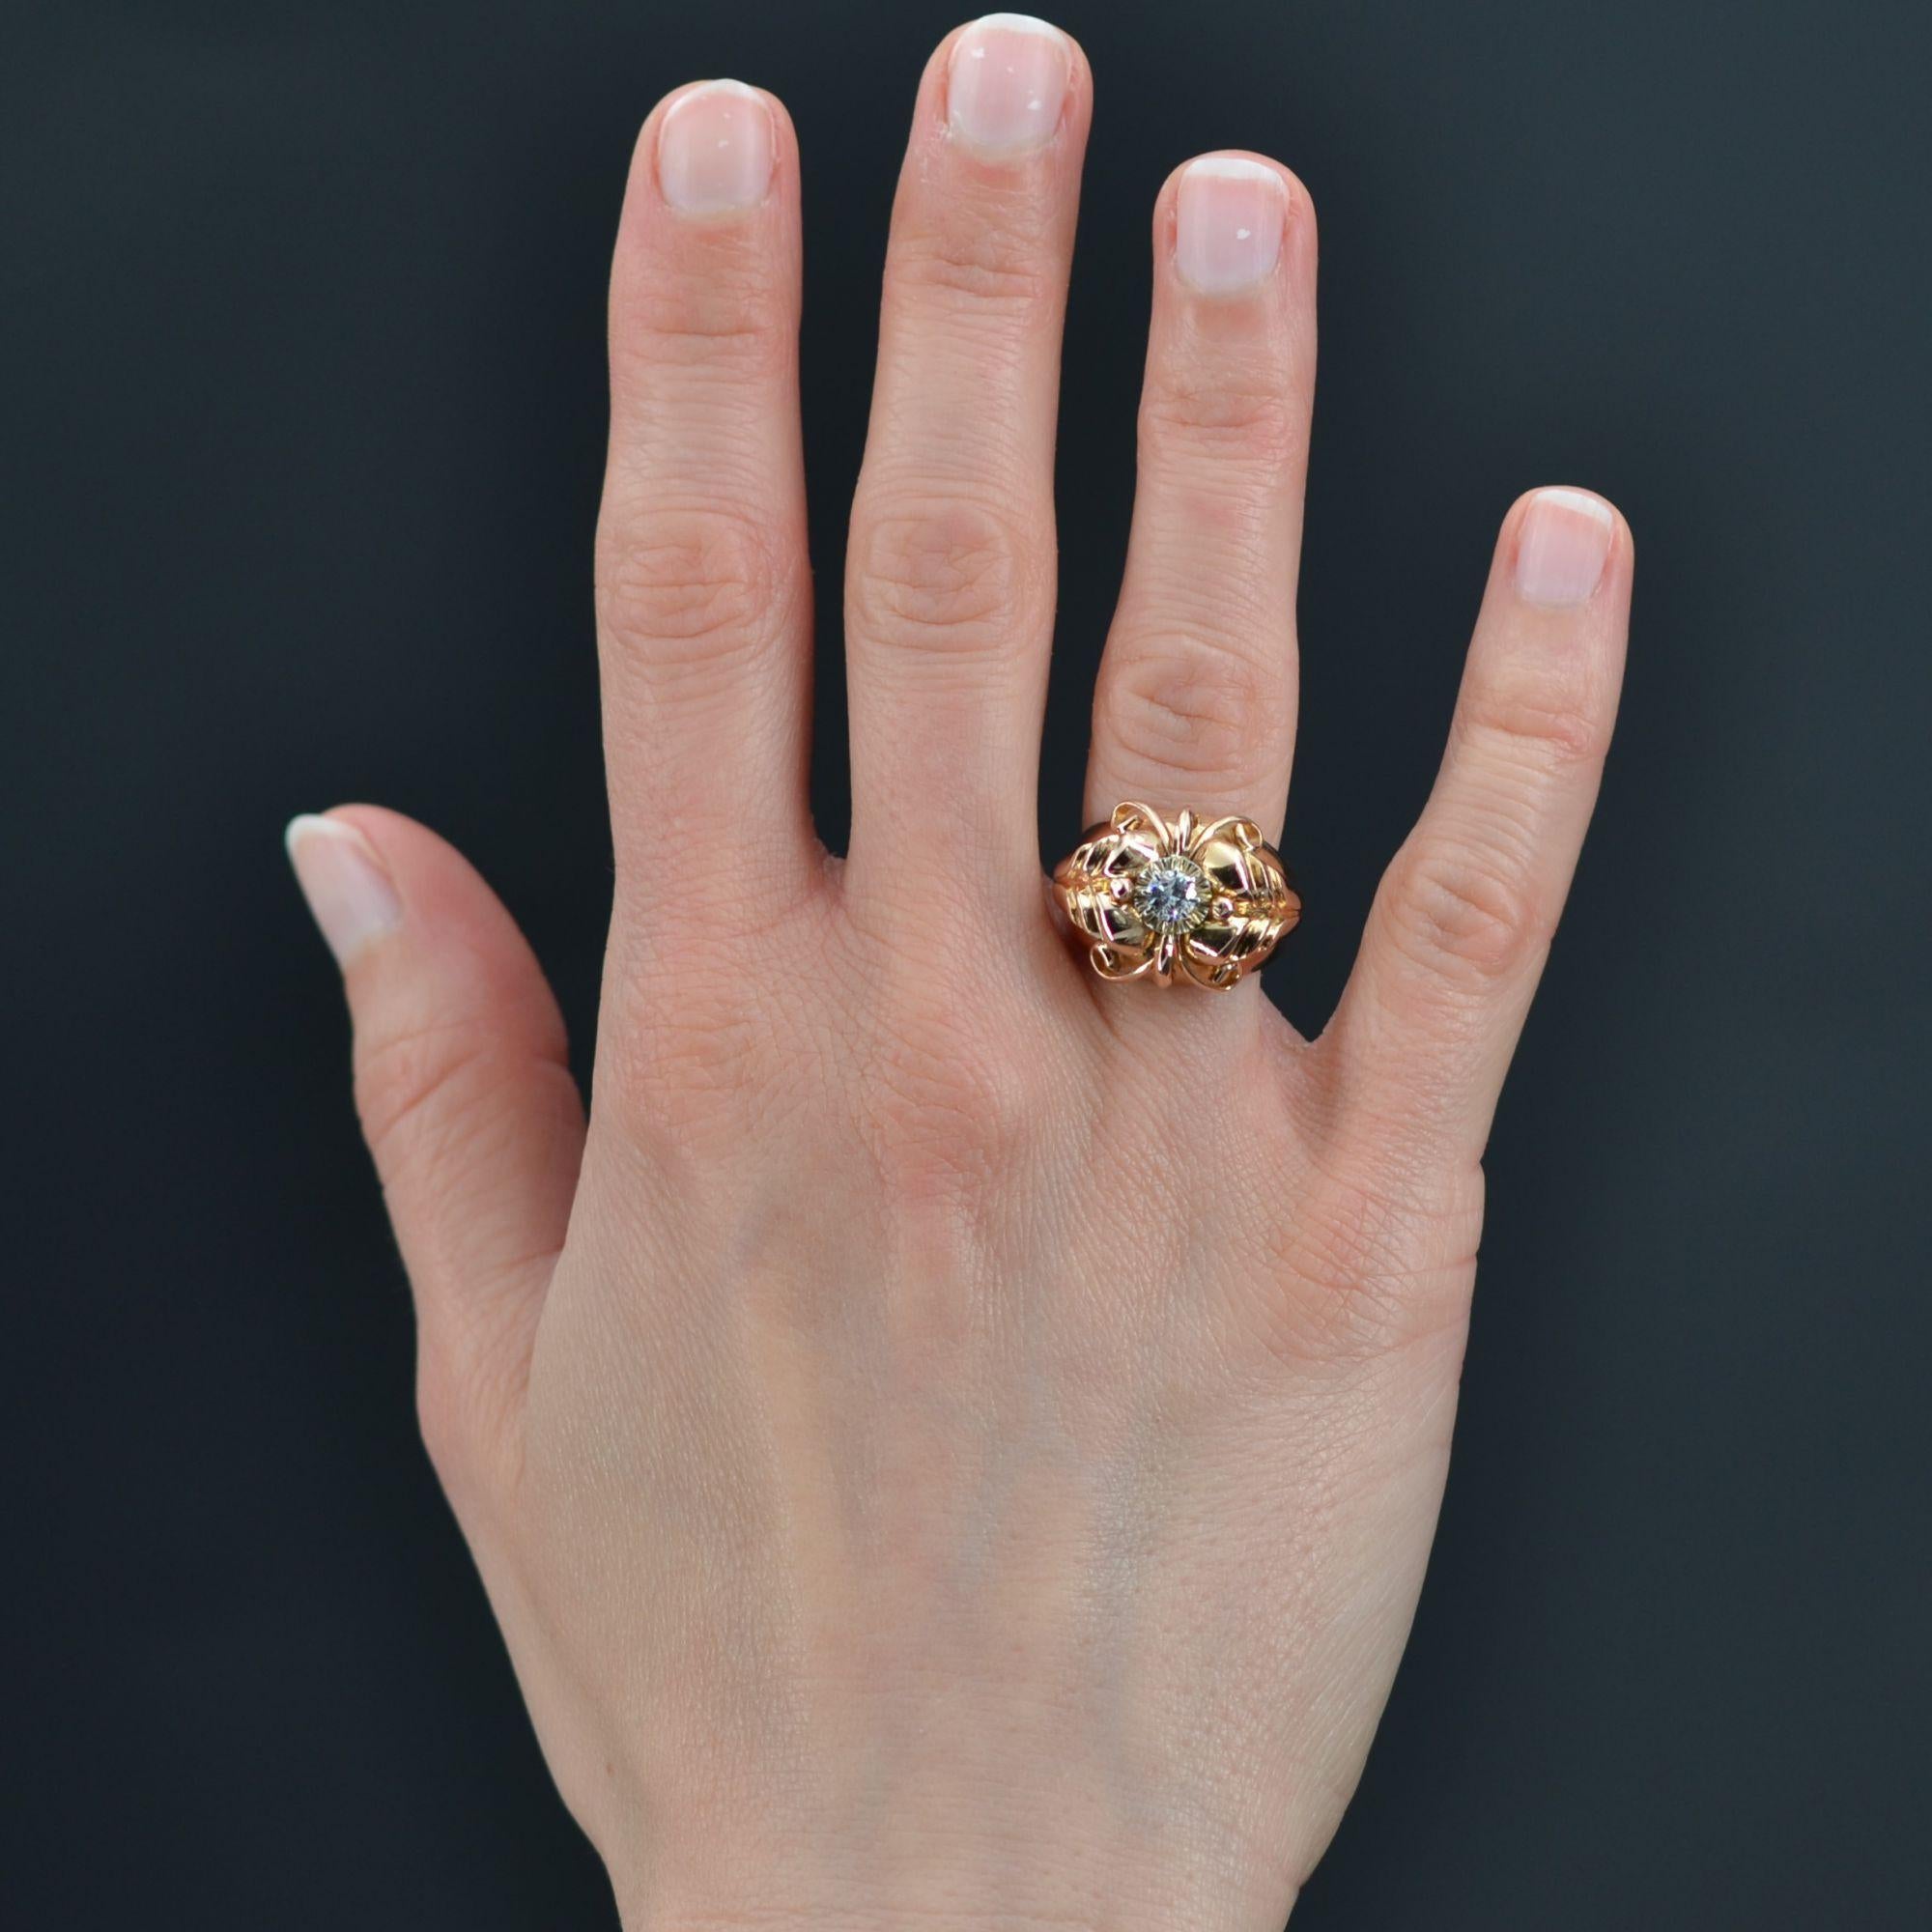 Ring in 18 karat rose gold, eagle head hallmark.
Large and domed, this antique ring is adorned on top with a modern brilliant-cut diamond held in a claw. The dome of this retro ring is decorated with arabesques, gold pearls and plant motifs on the